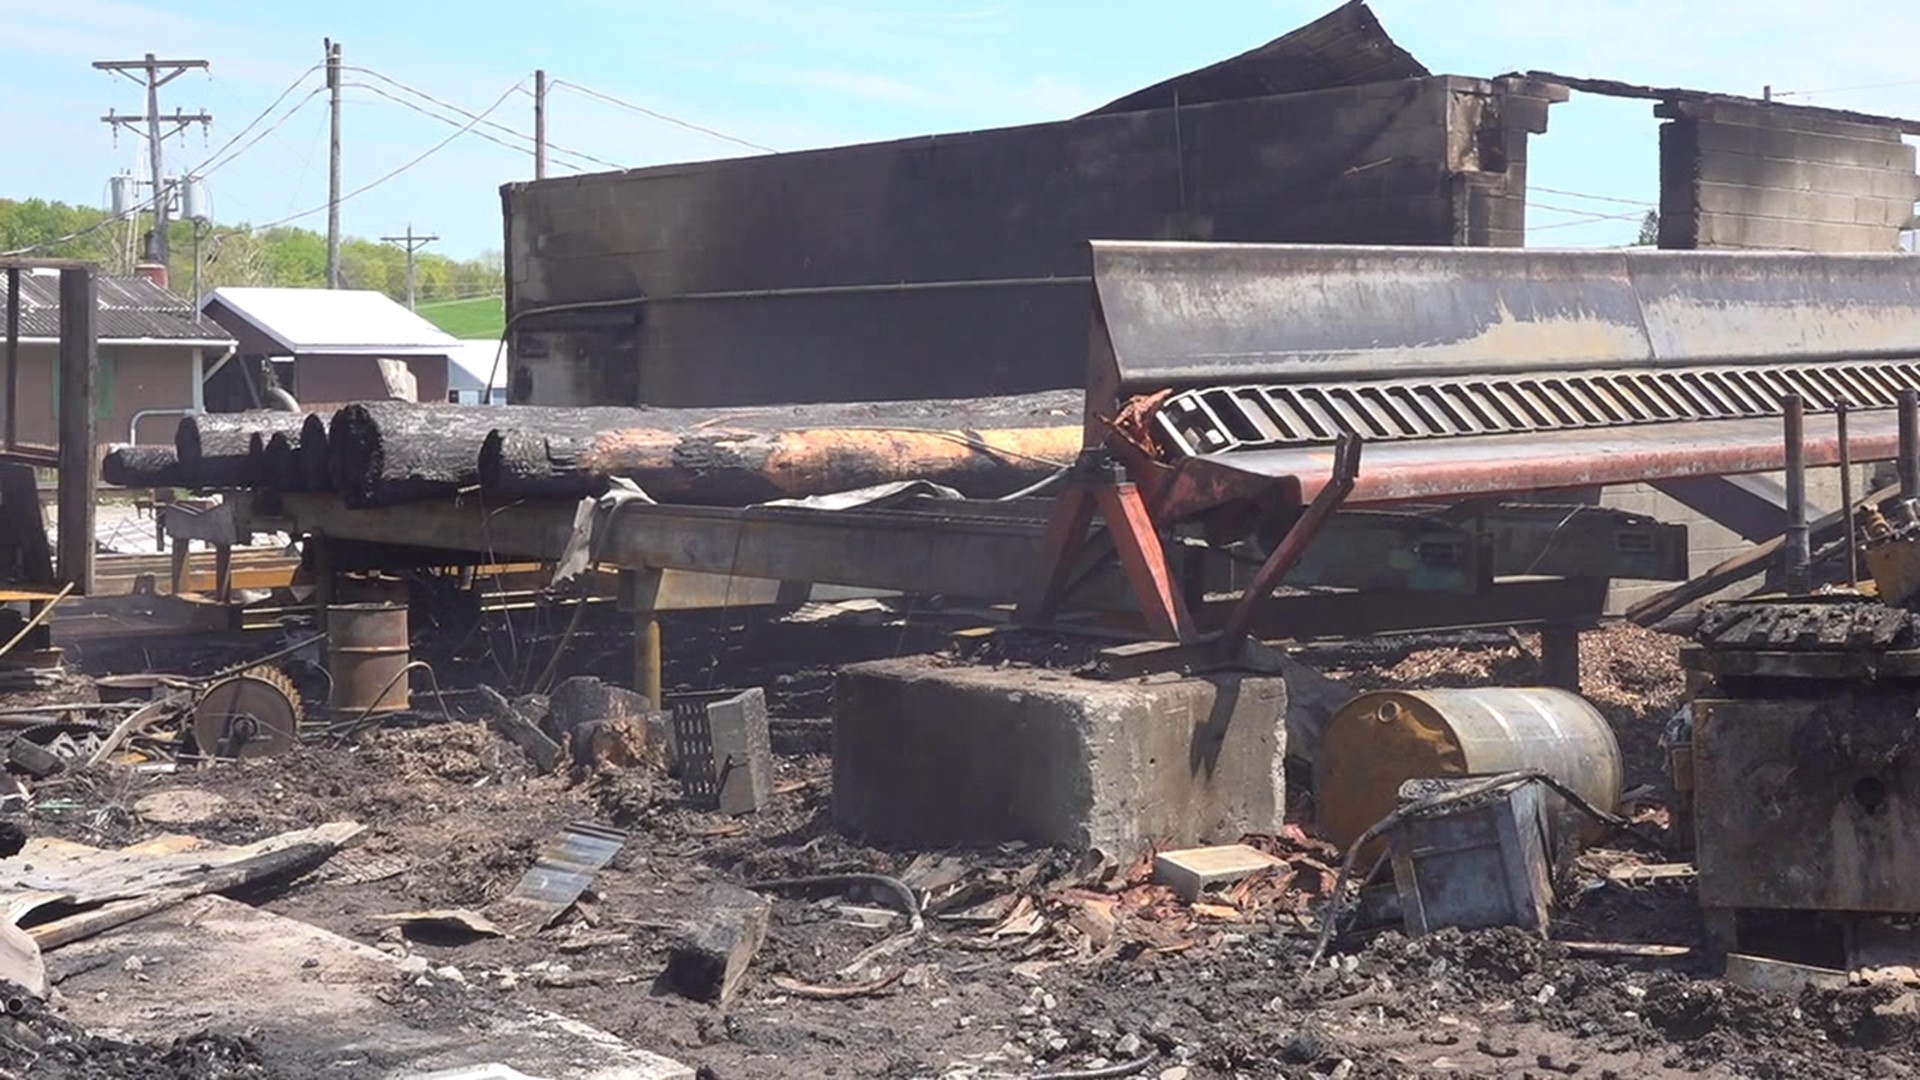 The owners of a 200-year-old lumberyard business in Bradford County destroyed by fire talk next steps.